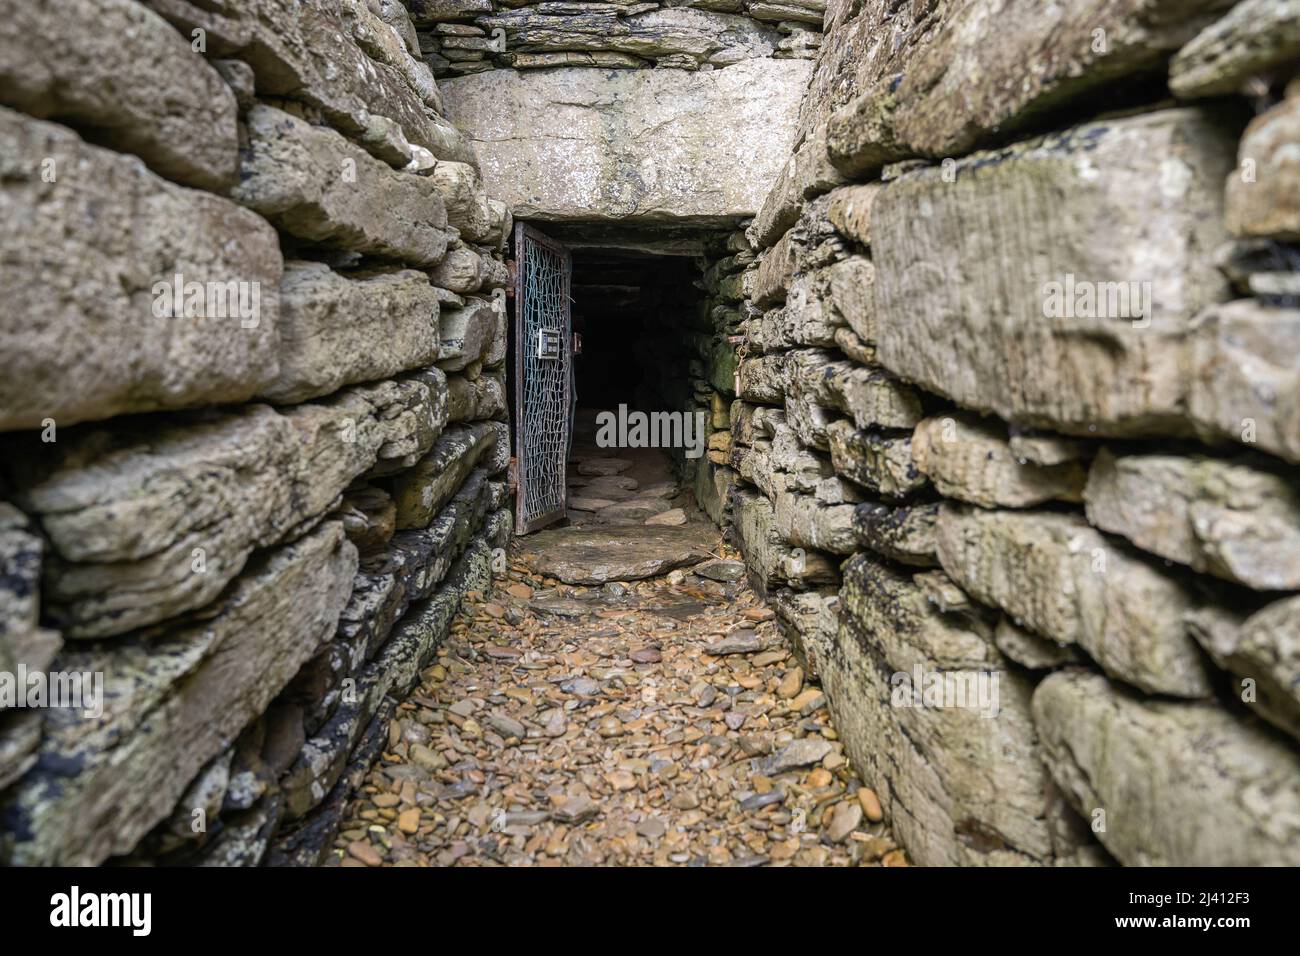 The narrow tunnel entranceway of Quoyness Chambered Cairn. You have to crawl 3 metres through the passageway to emerge inside the Neolithic tomb. Stock Photo